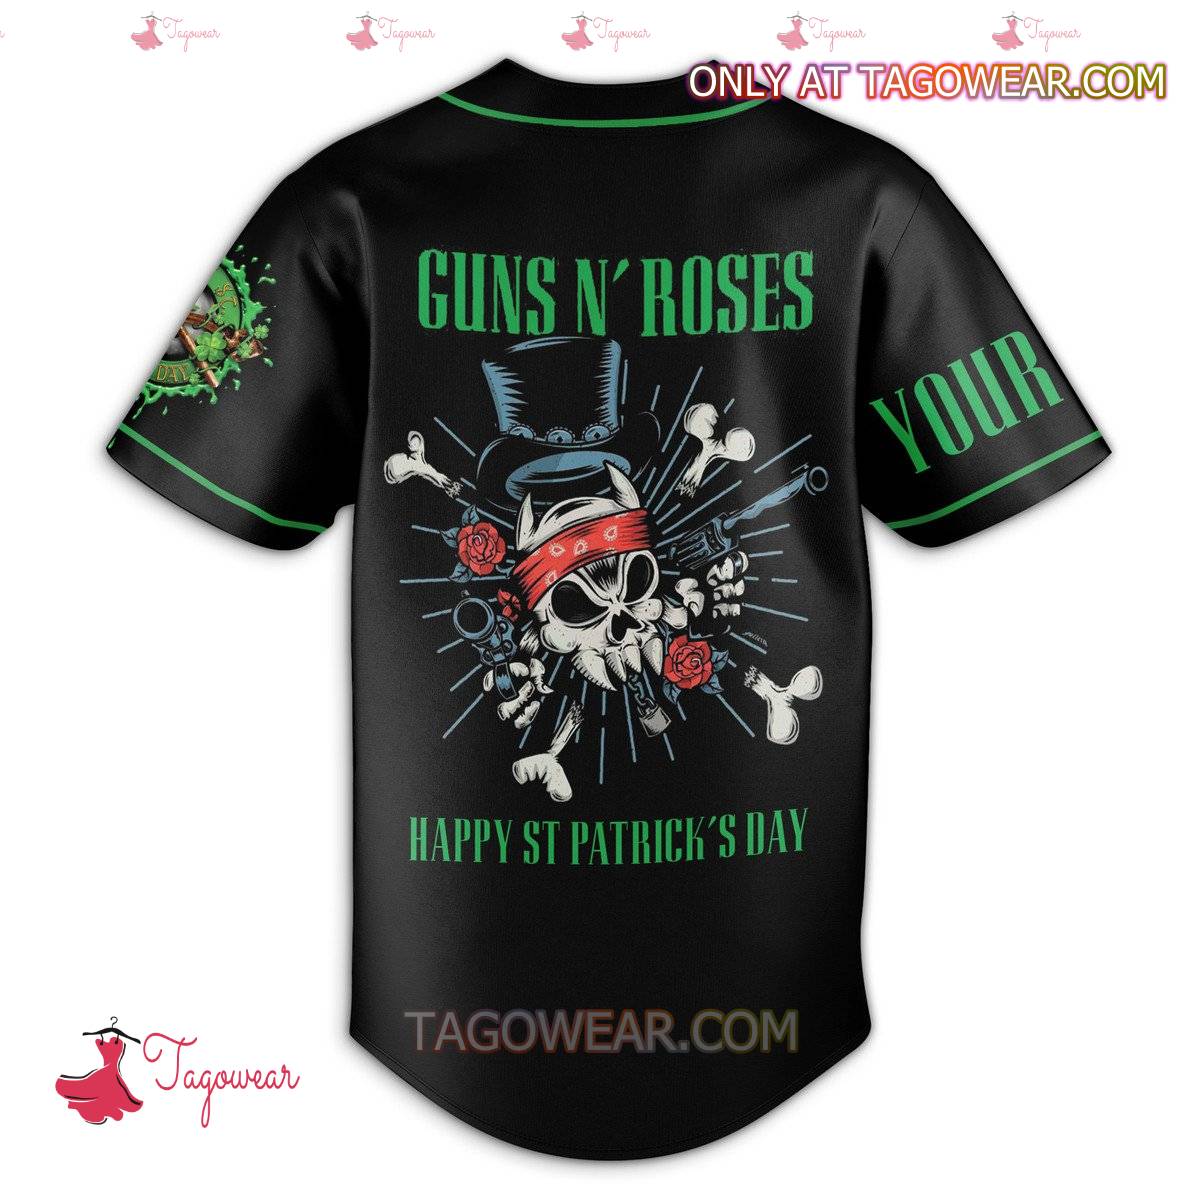 Guns N' Roses Happy St. Patrick's Day Personalized Baseball Jersey a